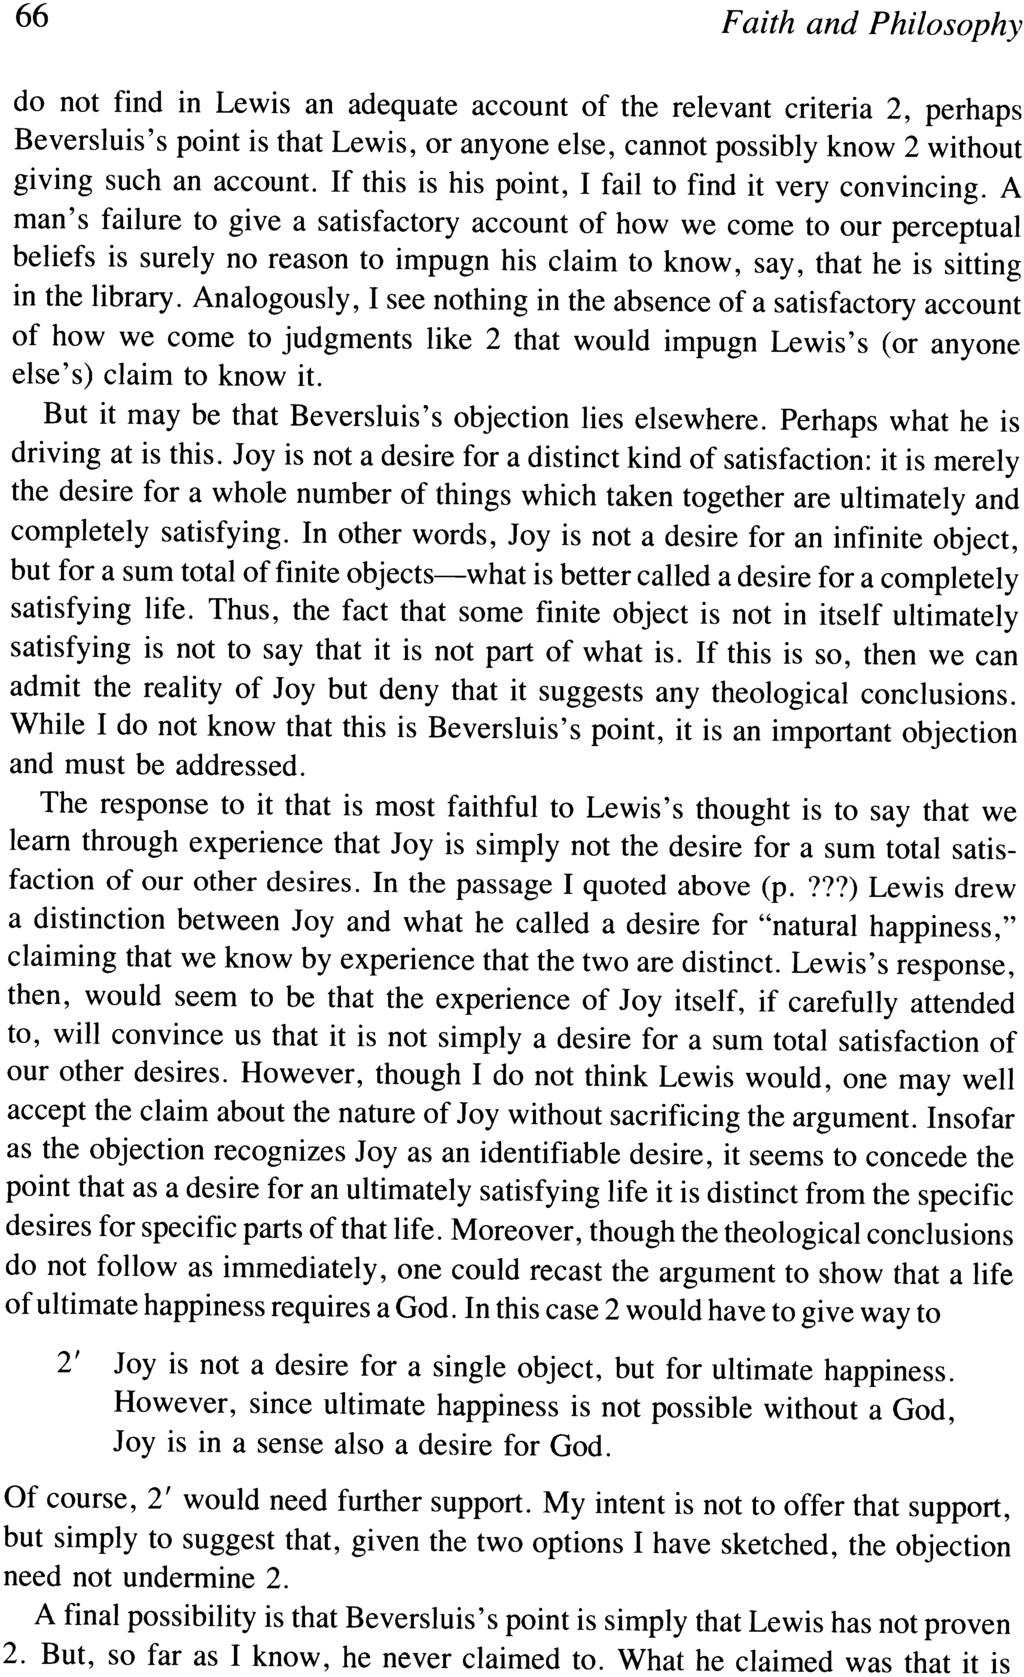 66 Faith and Philosophy do not find in Lewis an adequate account of the relevant criteria 2, perhaps Beversluis's point is that Lewis, or anyone else, cannot possibly know 2 without giving such an